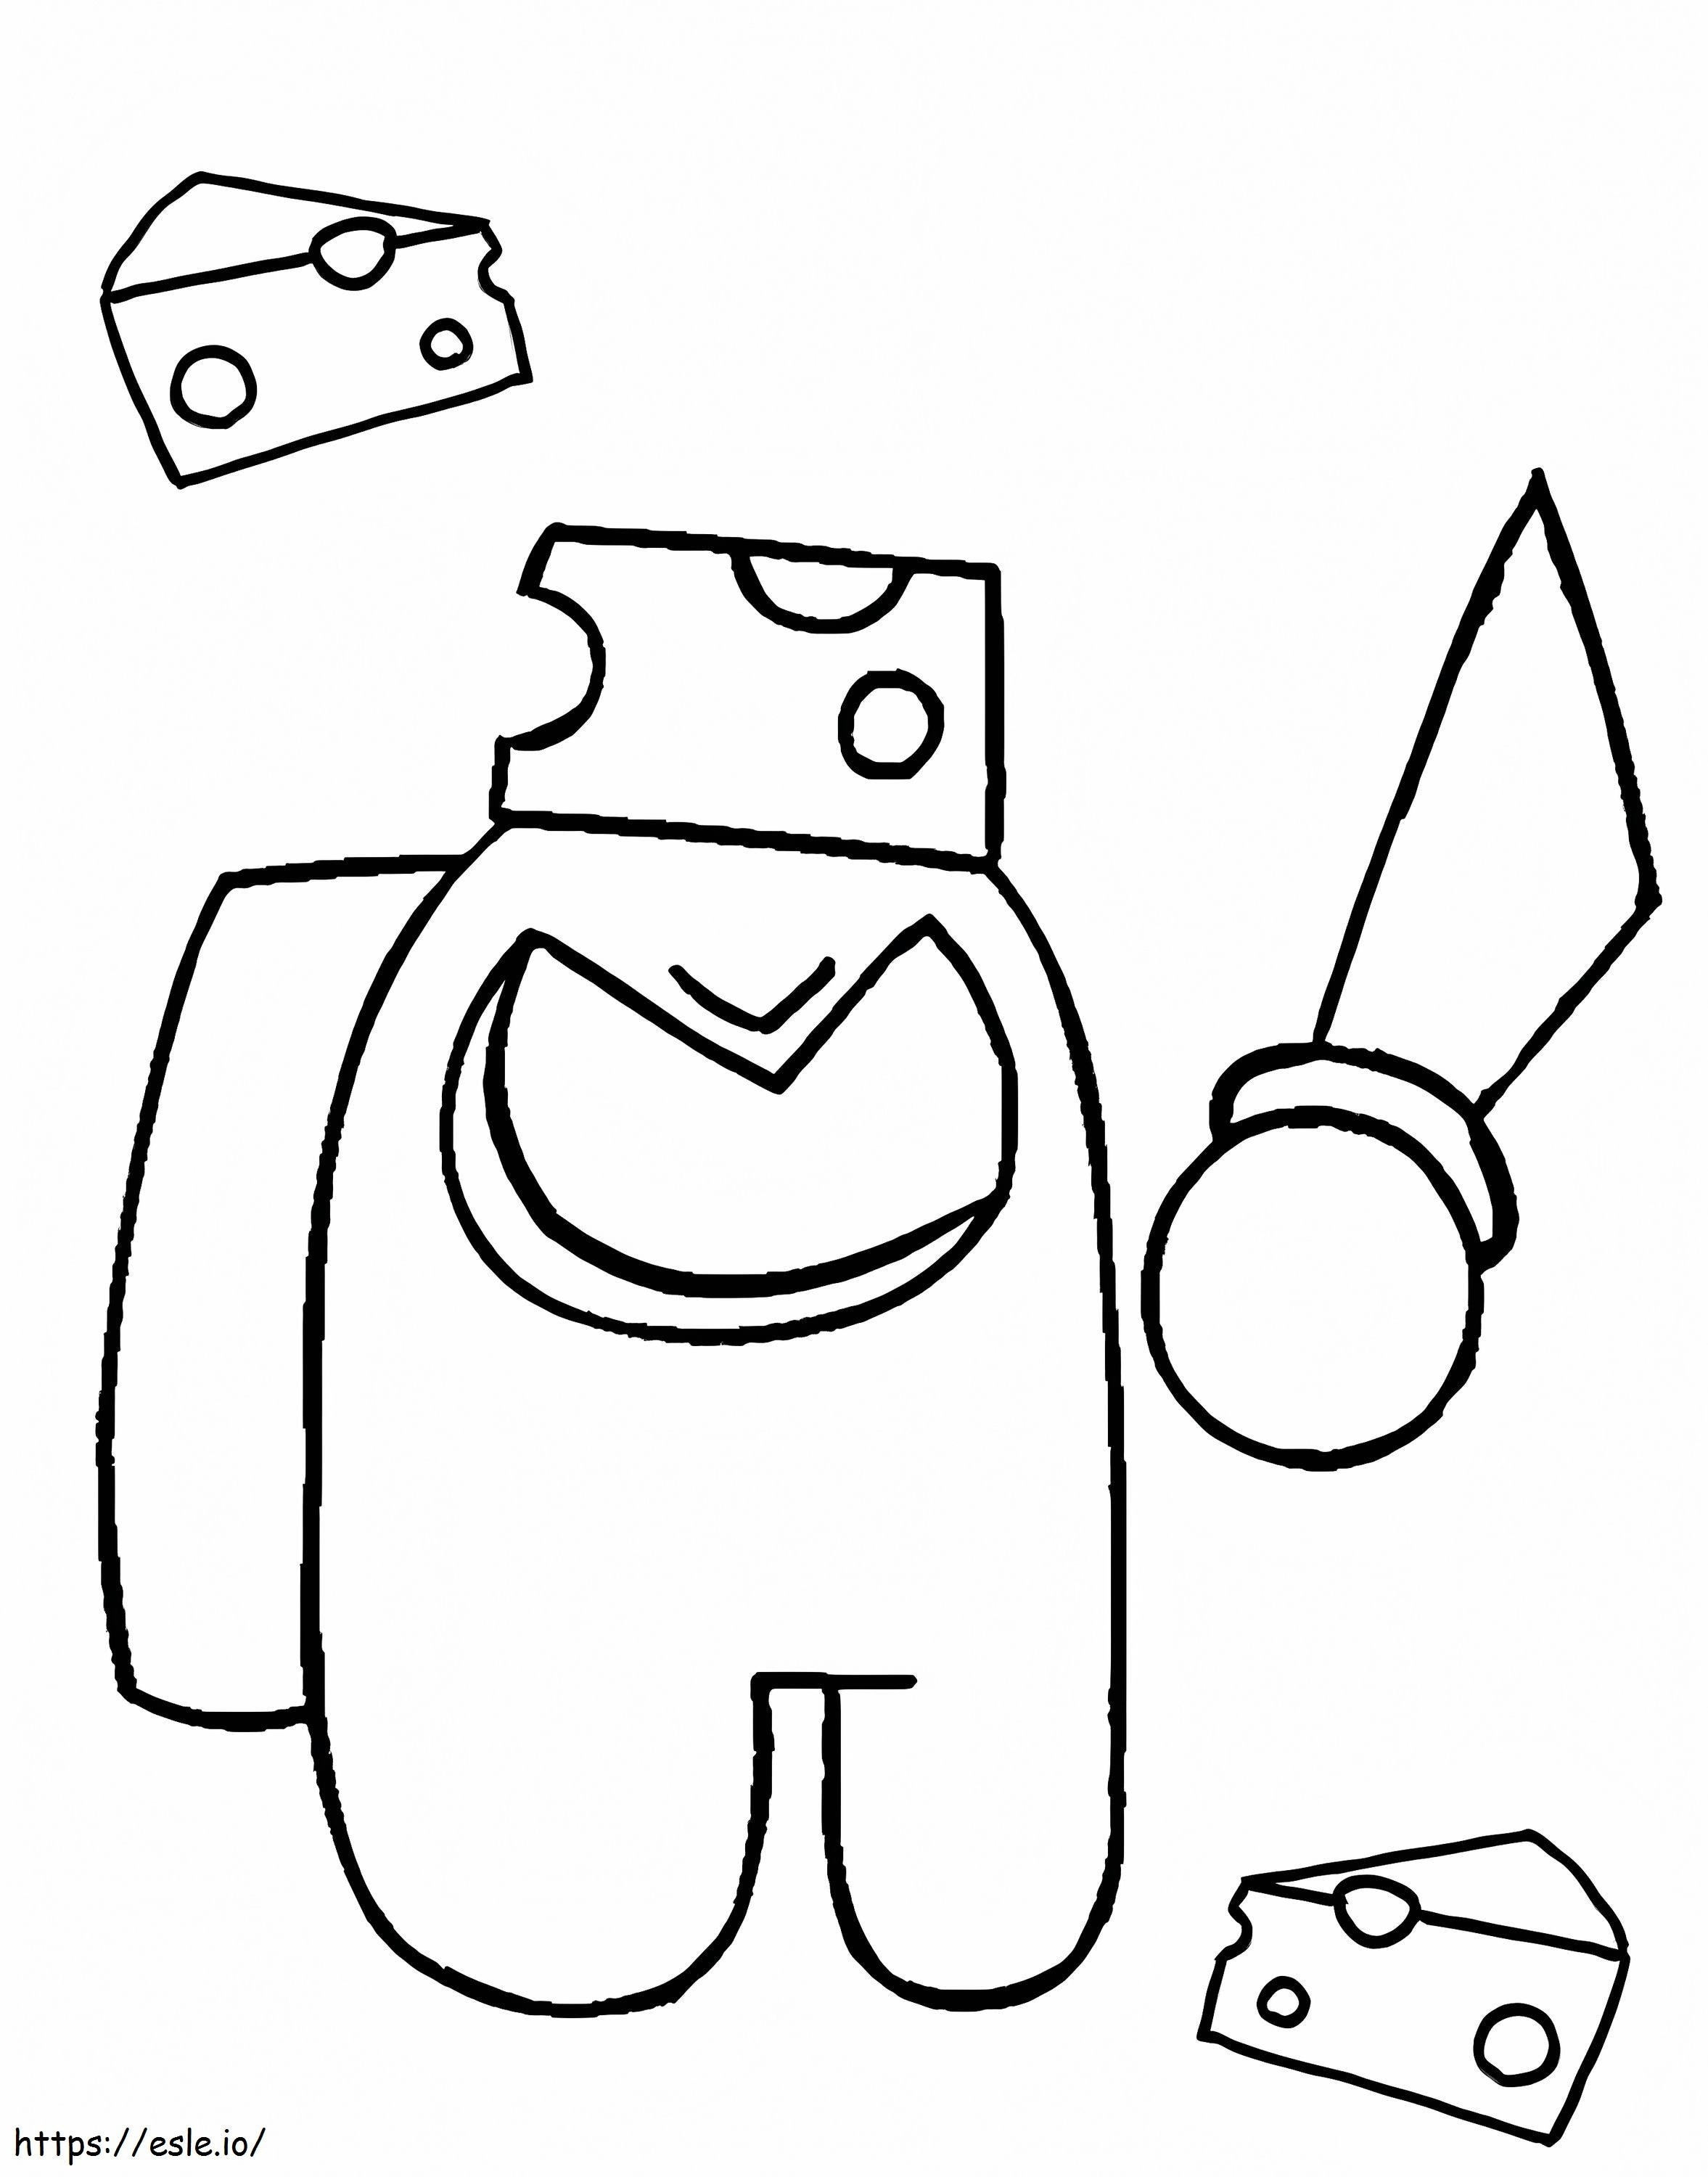 Among Us Mr. Cheese coloring page